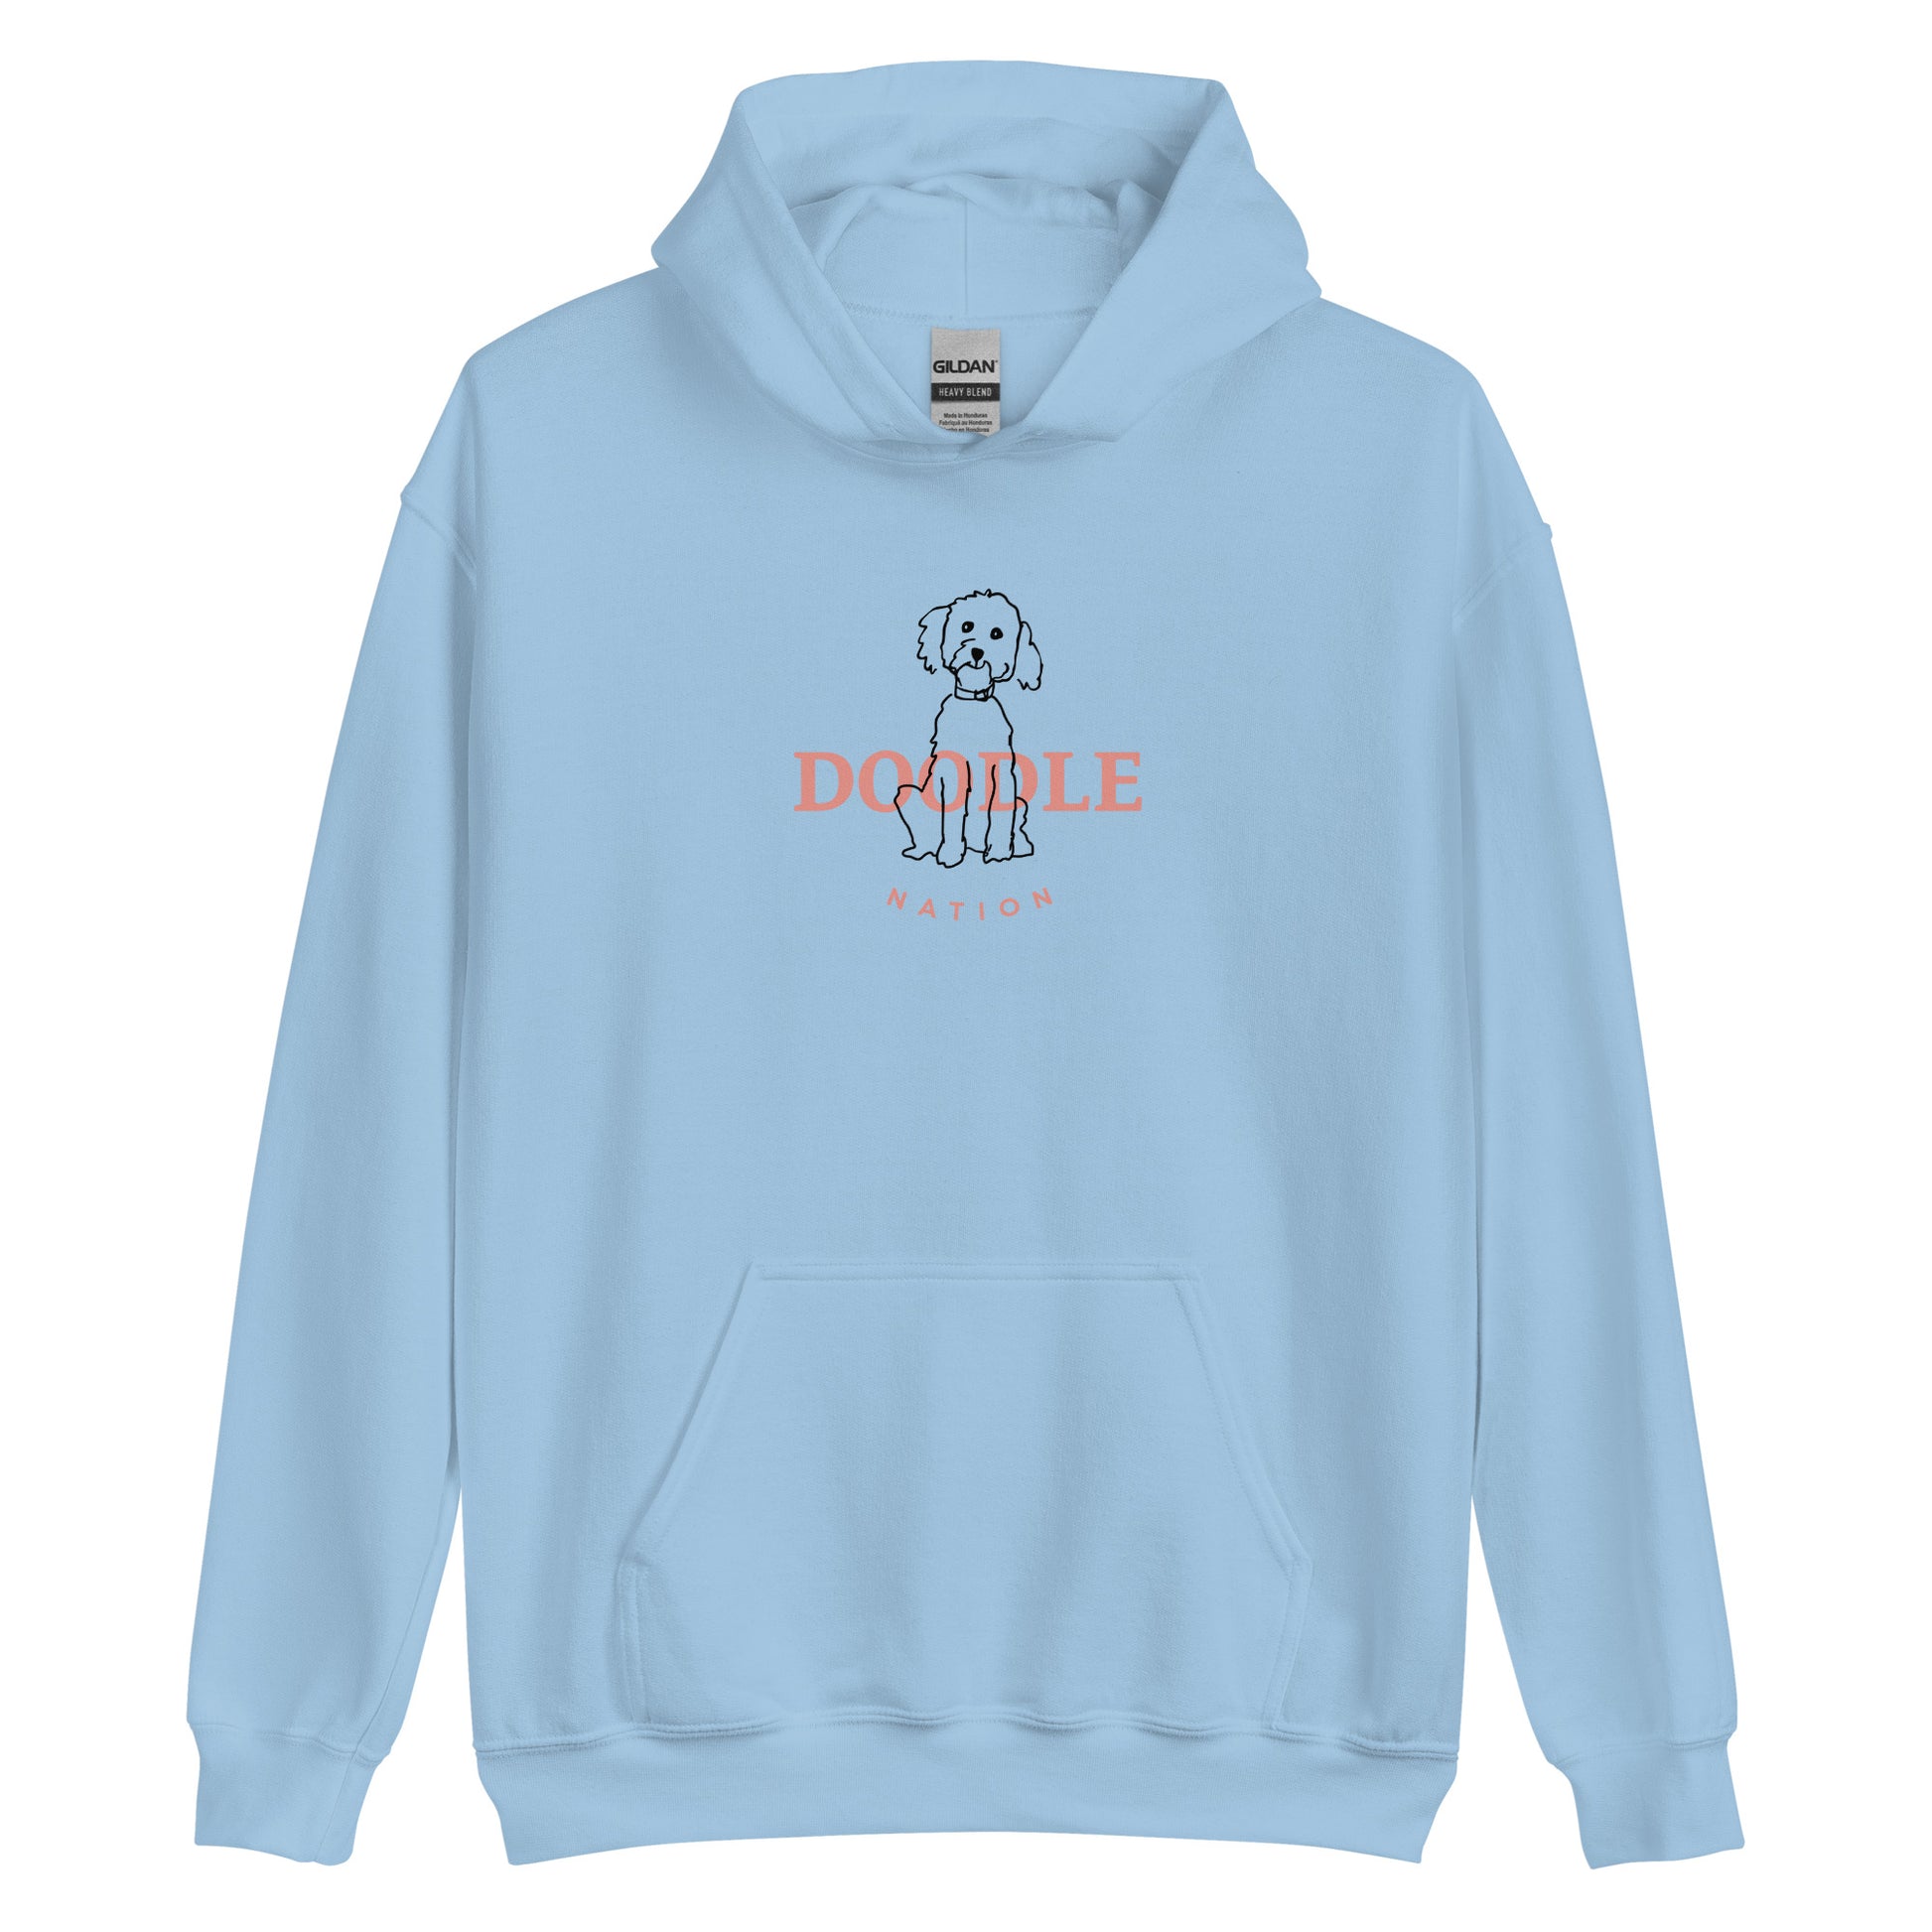 Goldendoodle hoodie with Goldendoodle and words "Doodle Nation" in light blue color